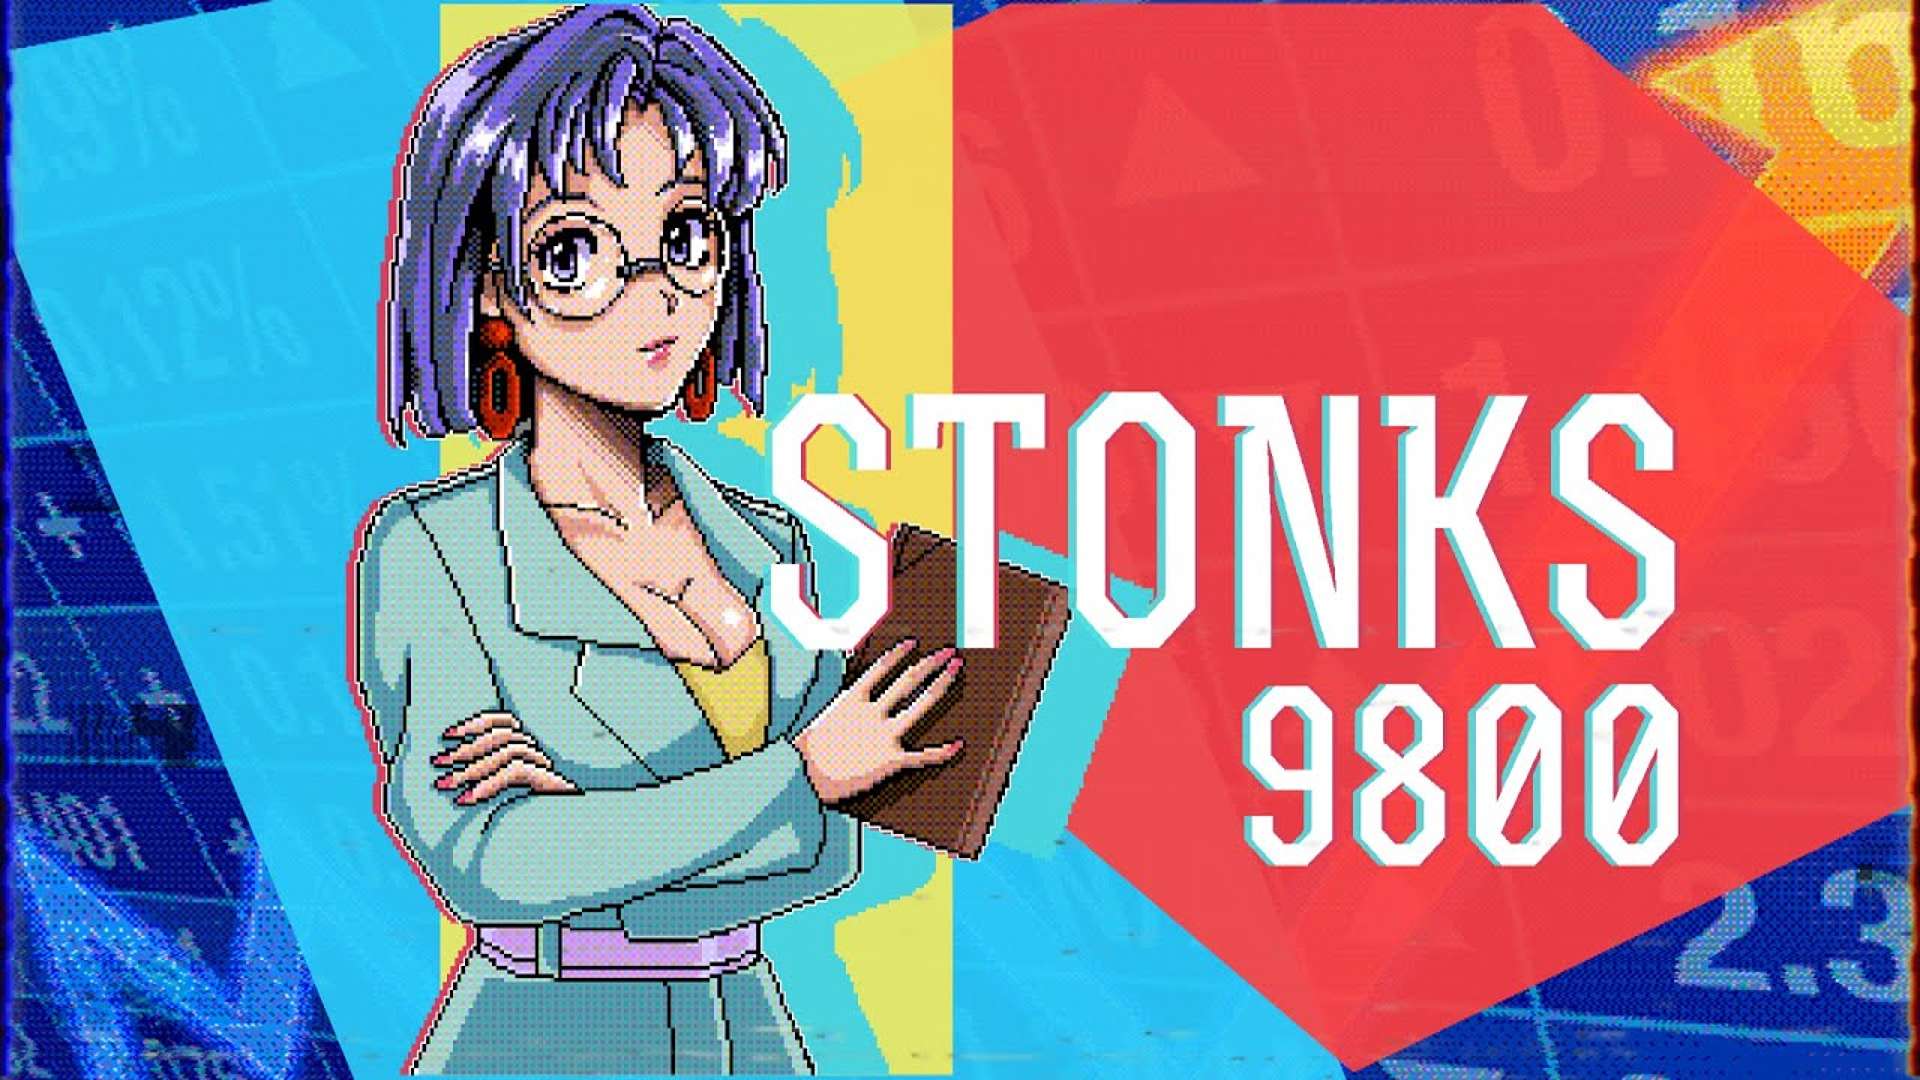 STONKS-9800: Stock Market Simulator - PC Early Access Review